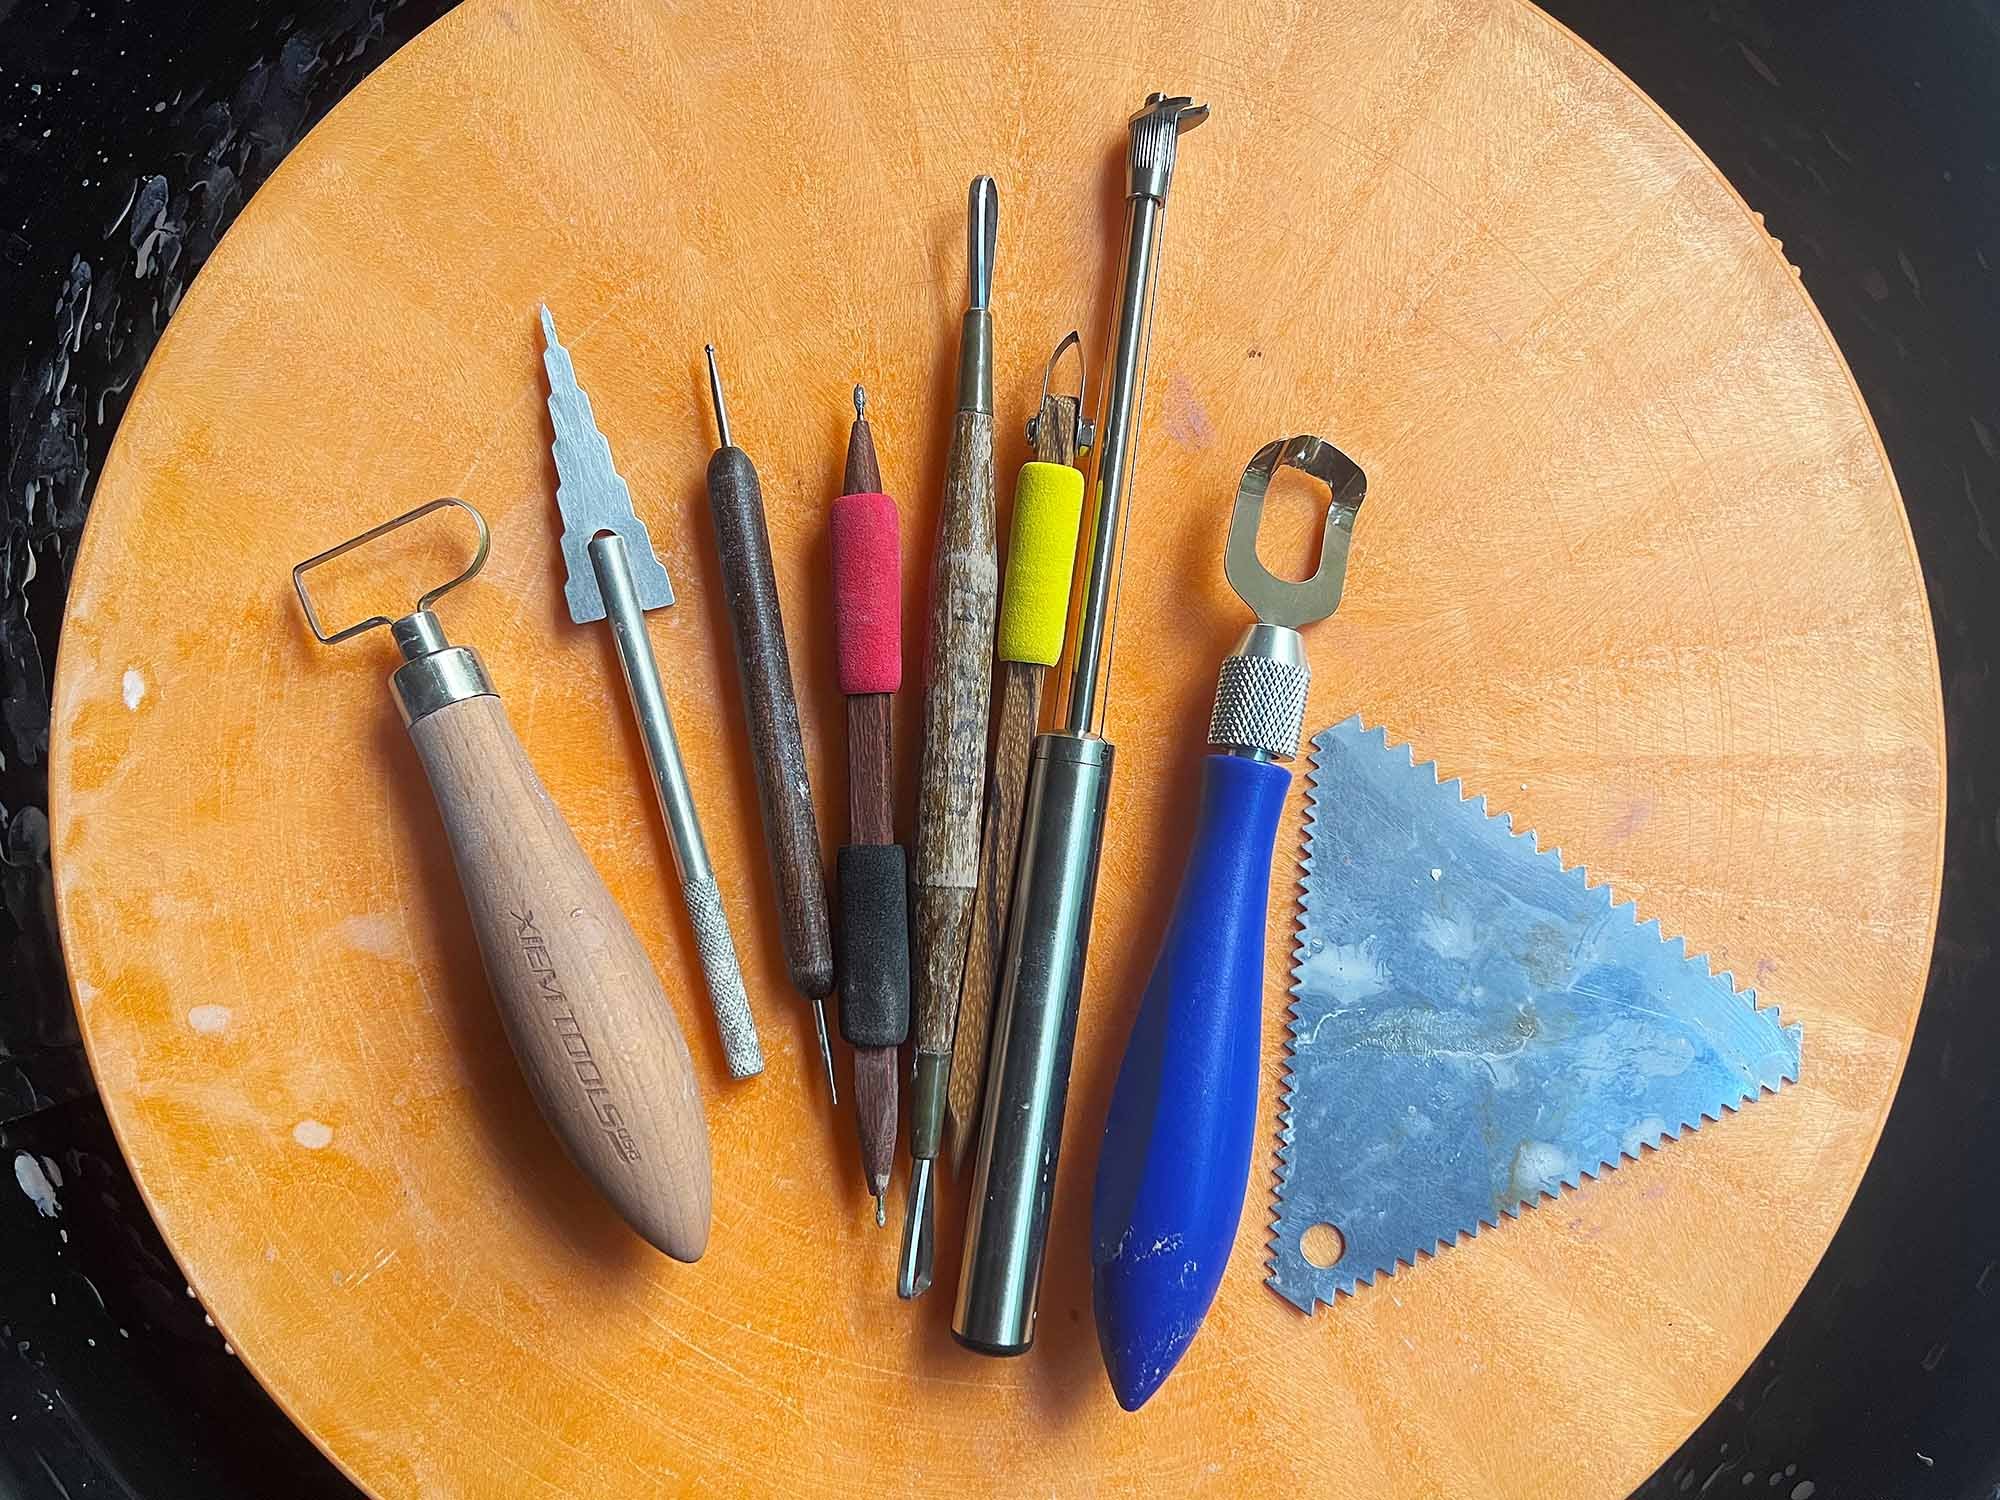 Best Carving and Sgraffito Tools for Decorating Pottery — The Studio Manager